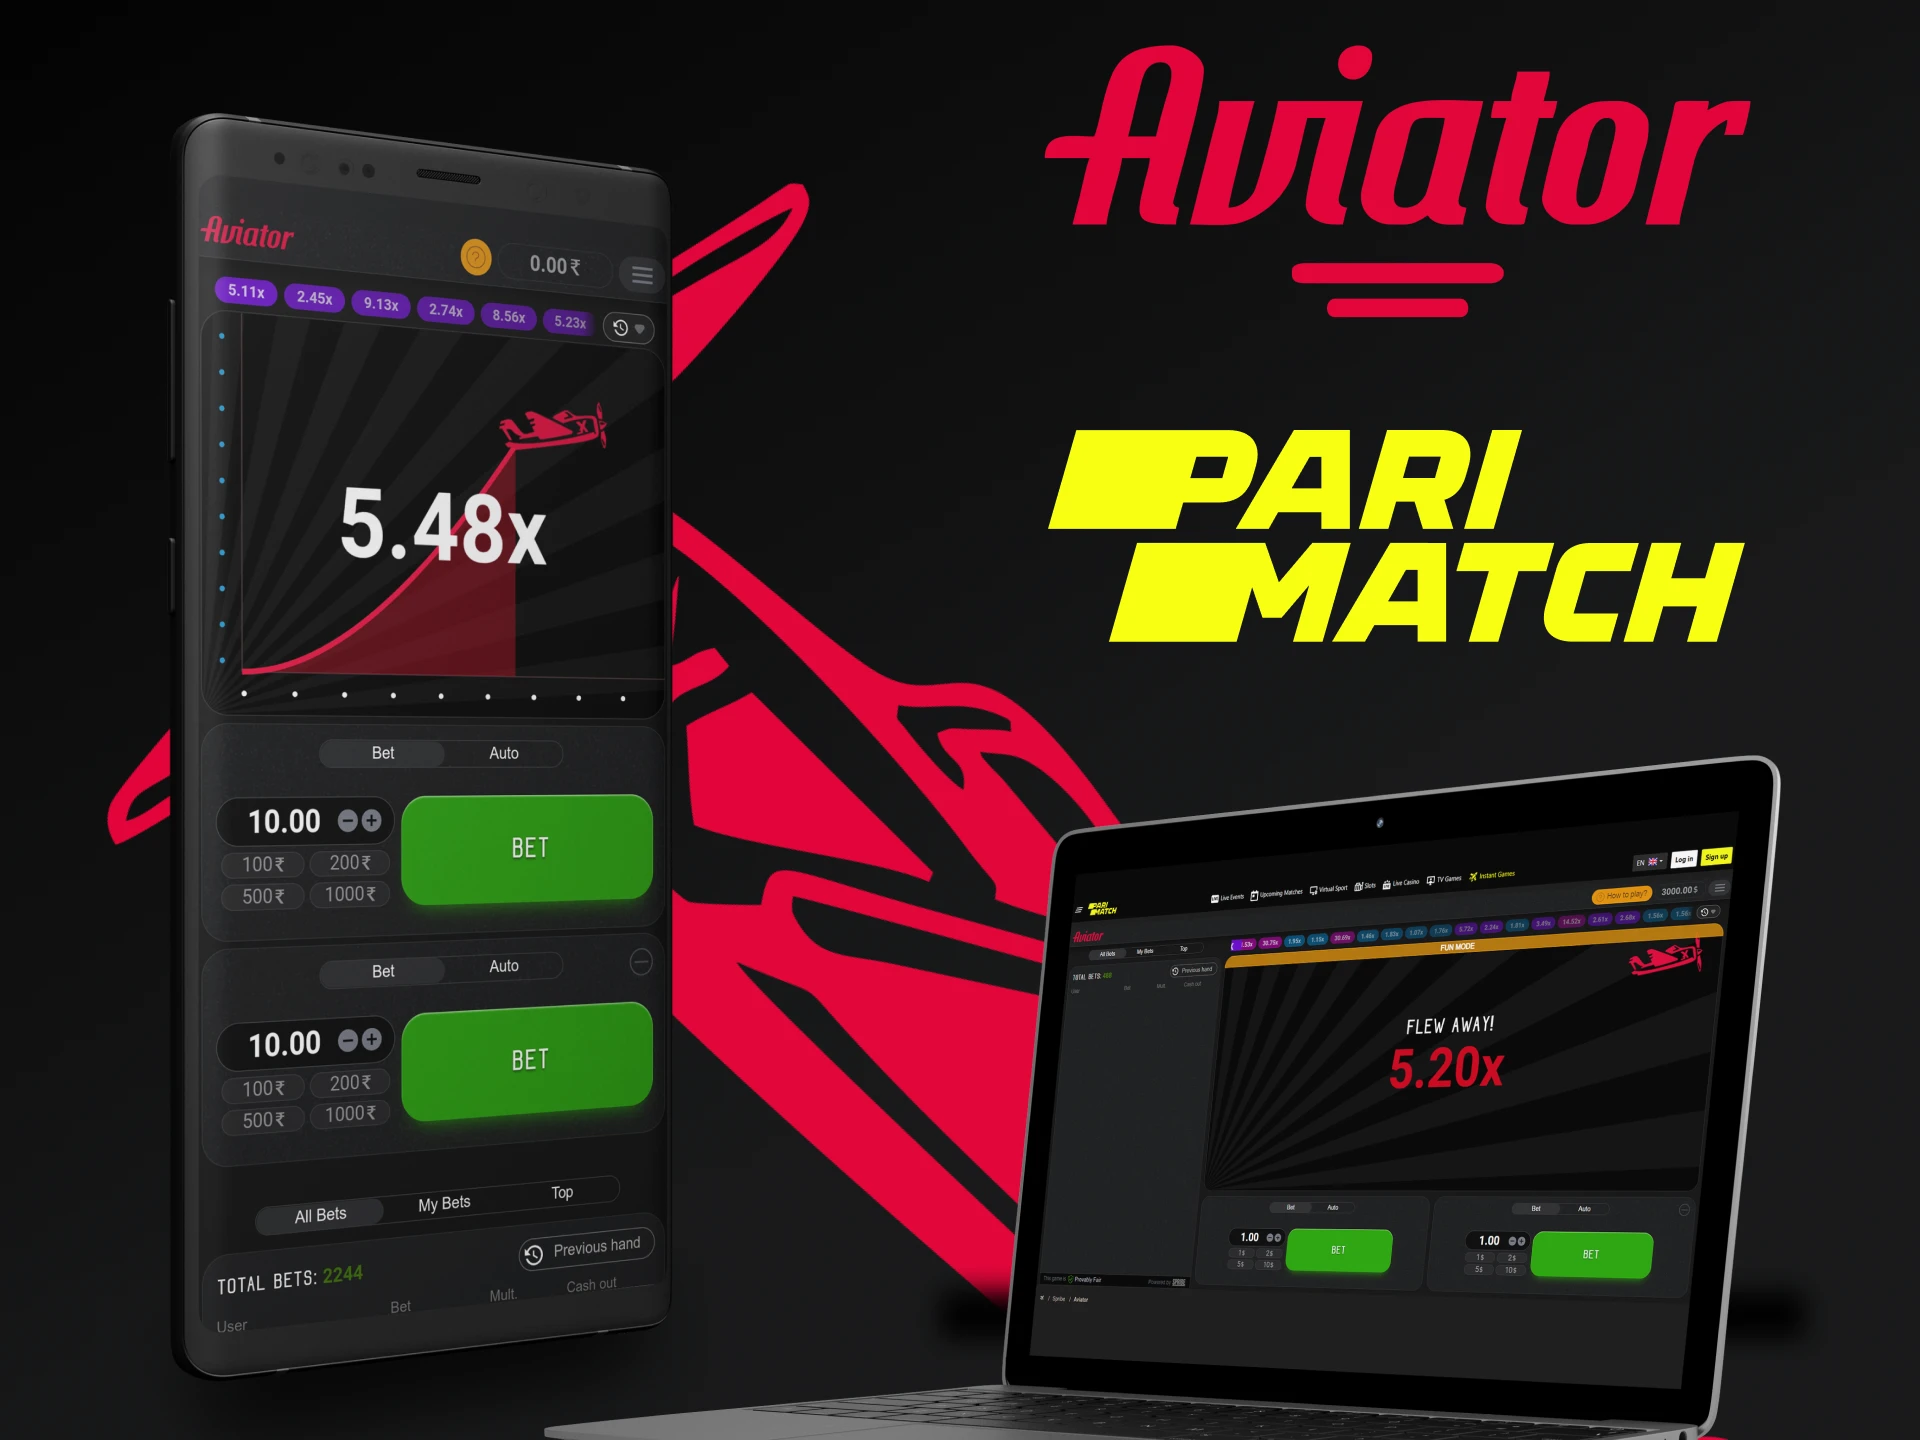 You can choose a convenient way from Parimatch to play Aviator.